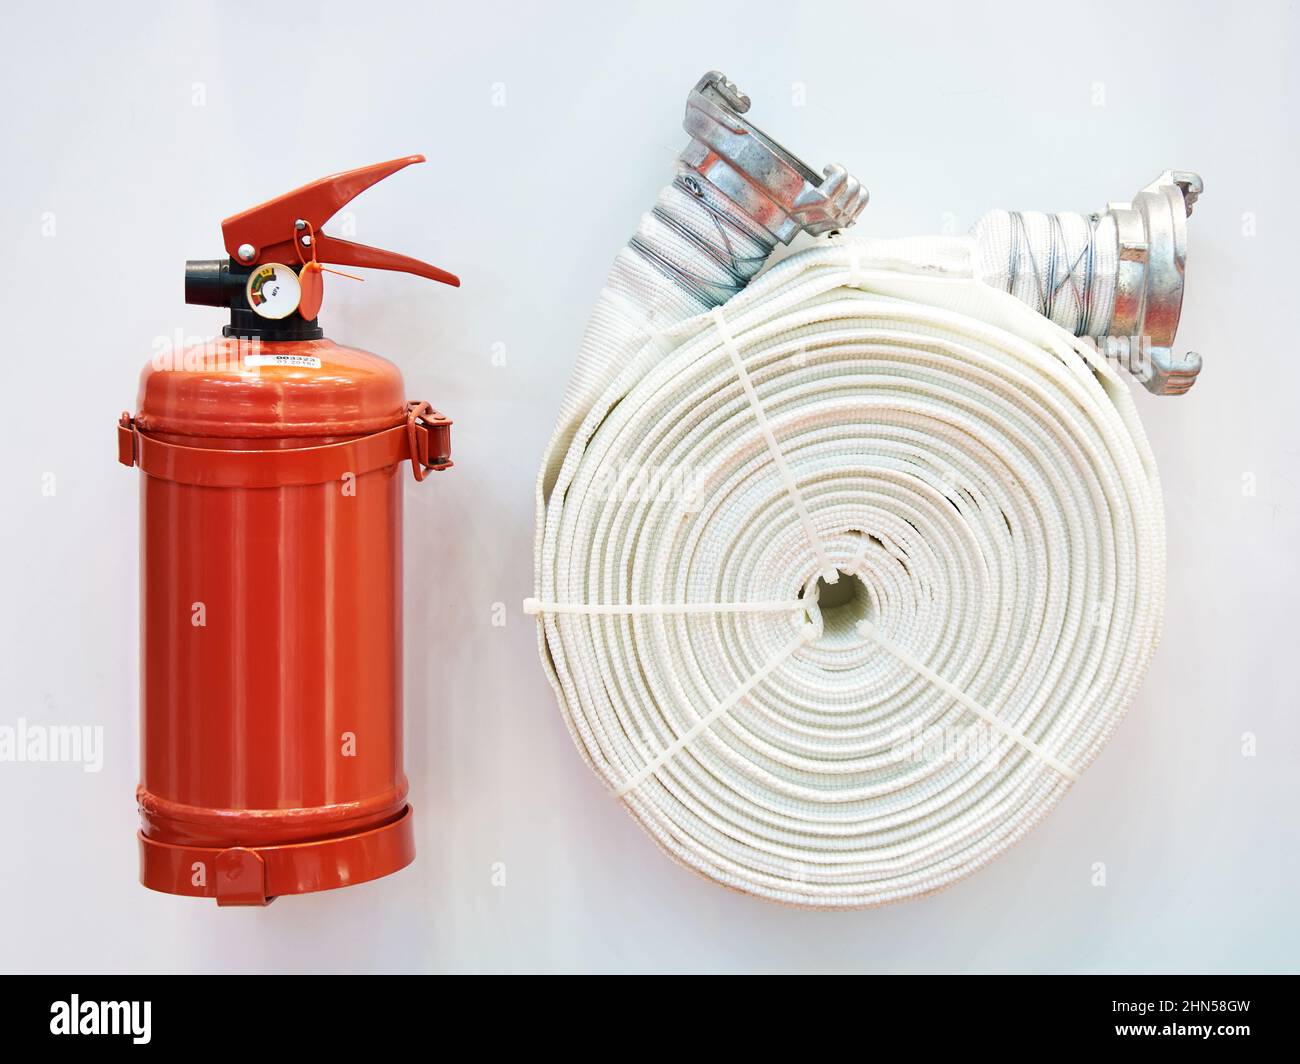 Powder fire extinguisher and fire hose on stand Stock Photo